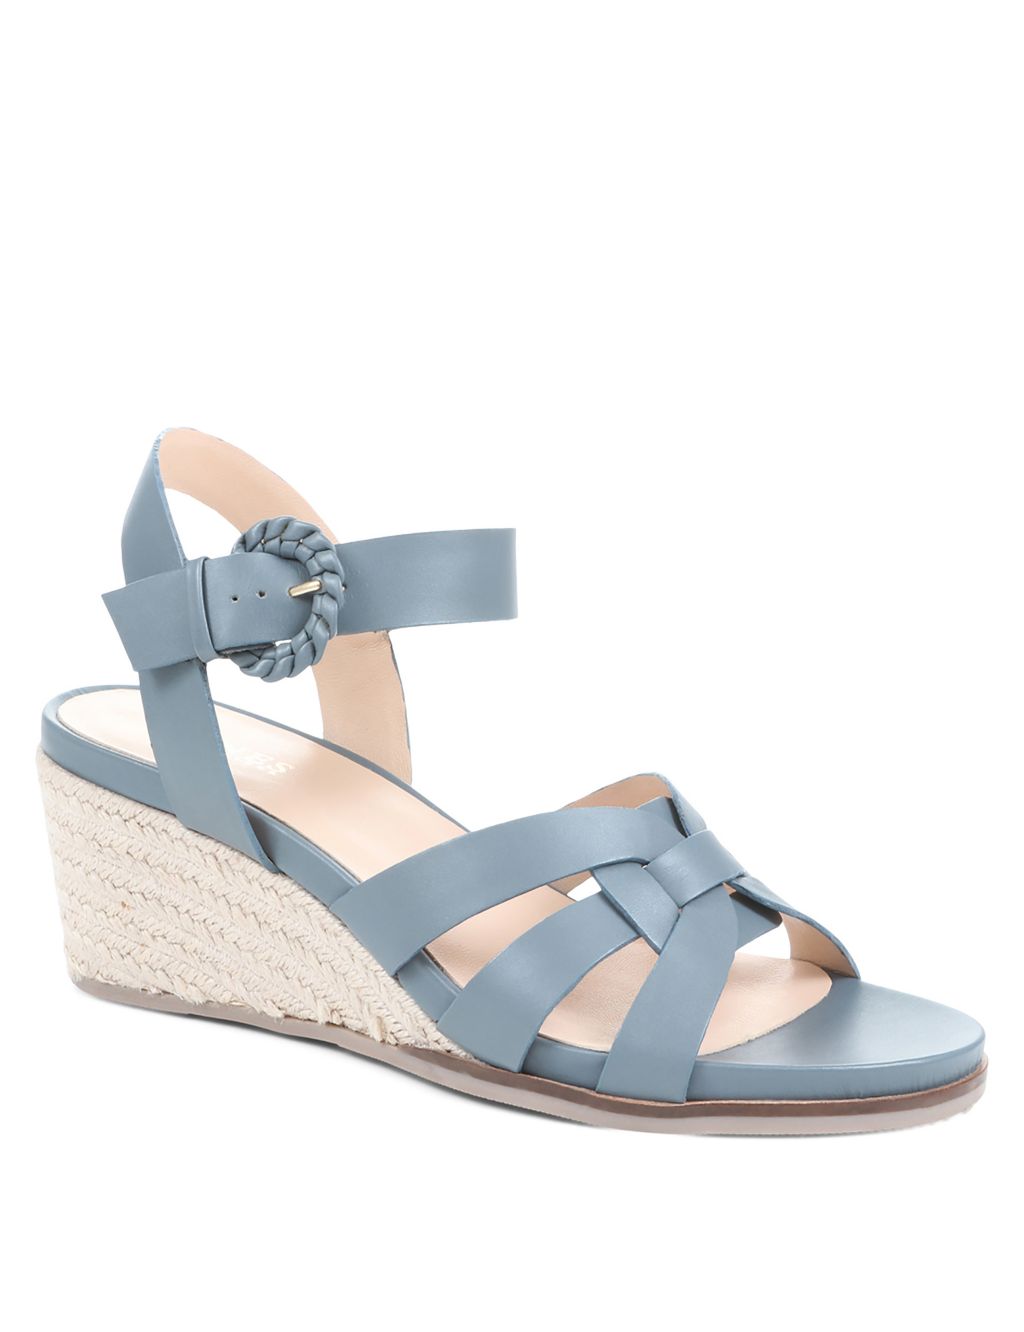 Leather Strappy Wedge Sandals image 3